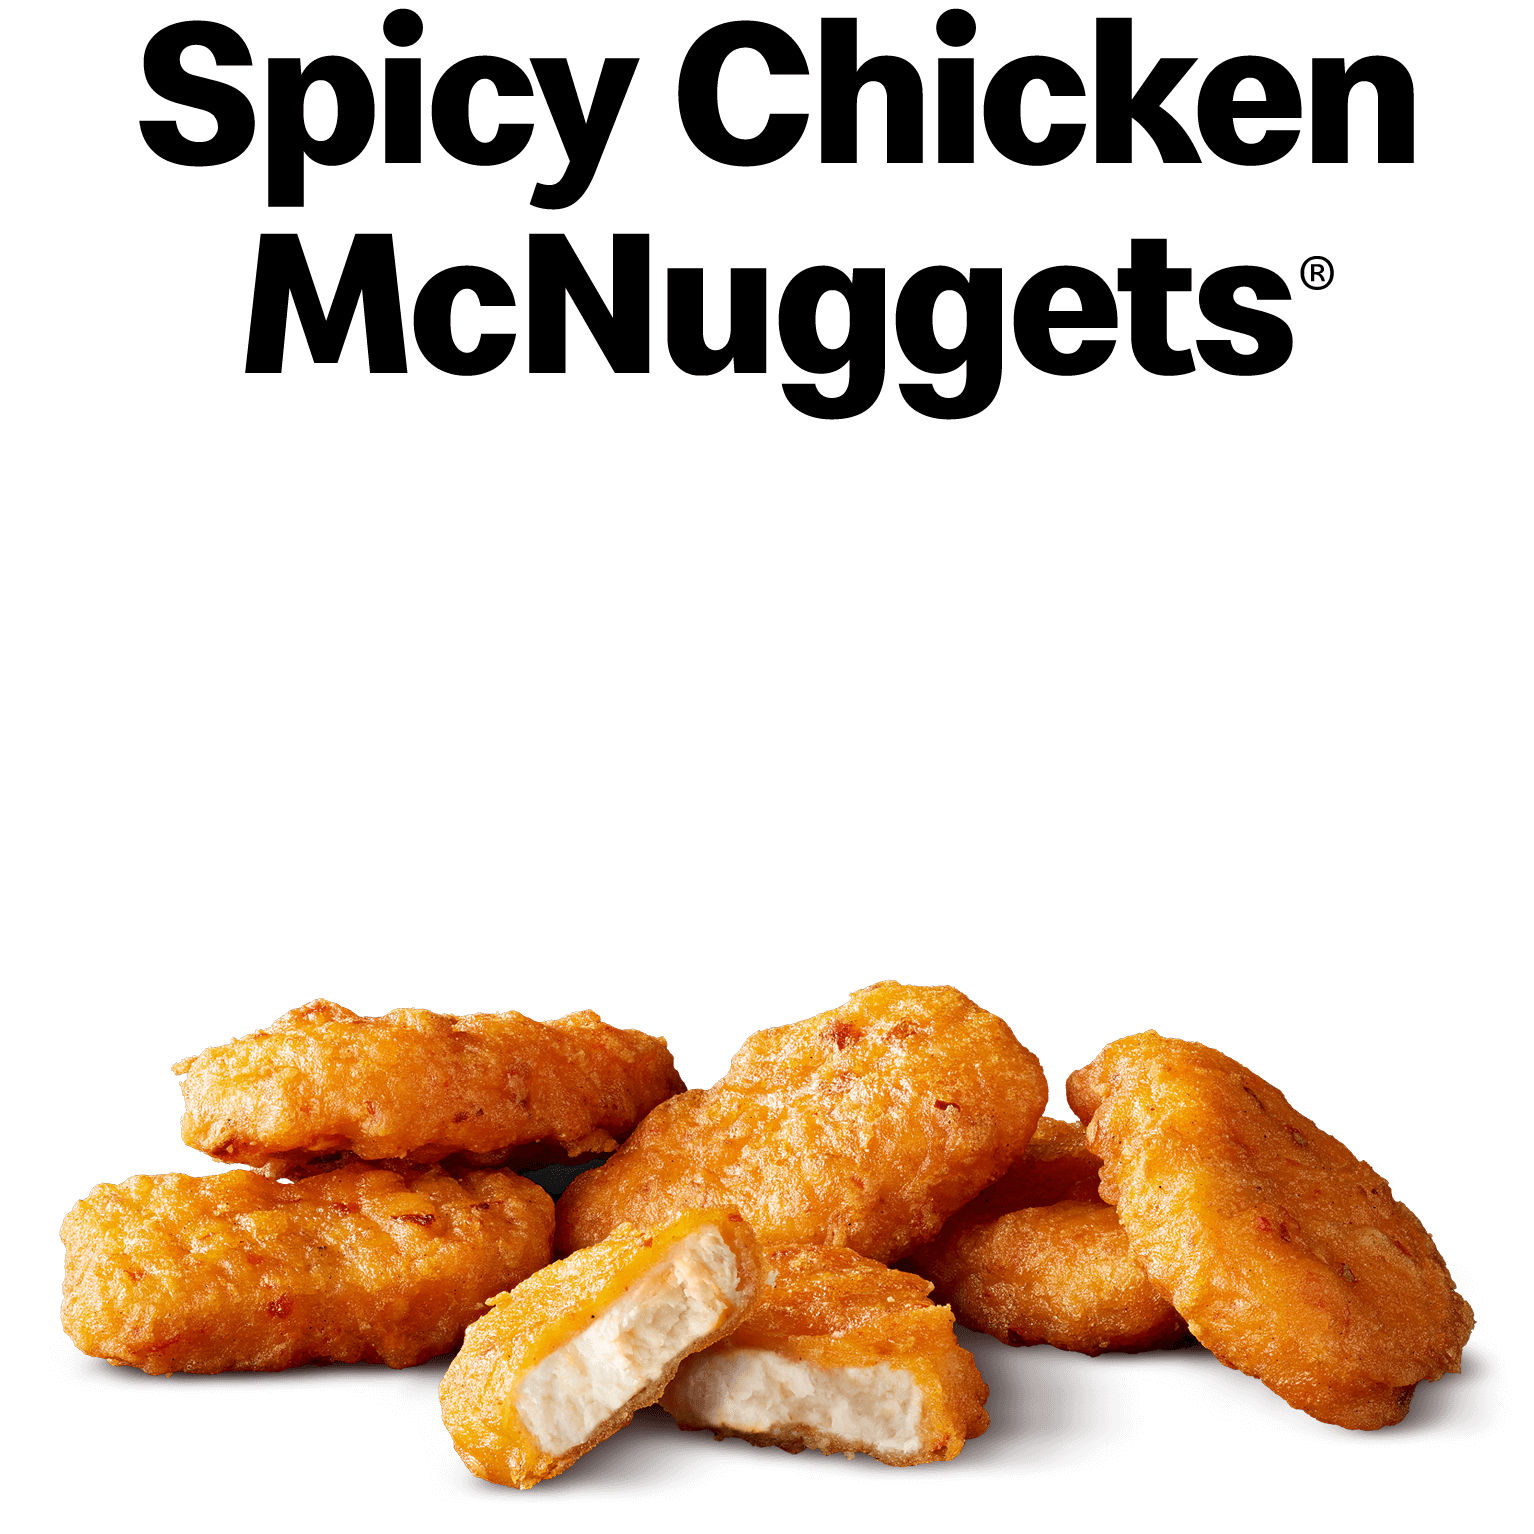 McDonald's Spicy Nuggets are back. My Family Pride